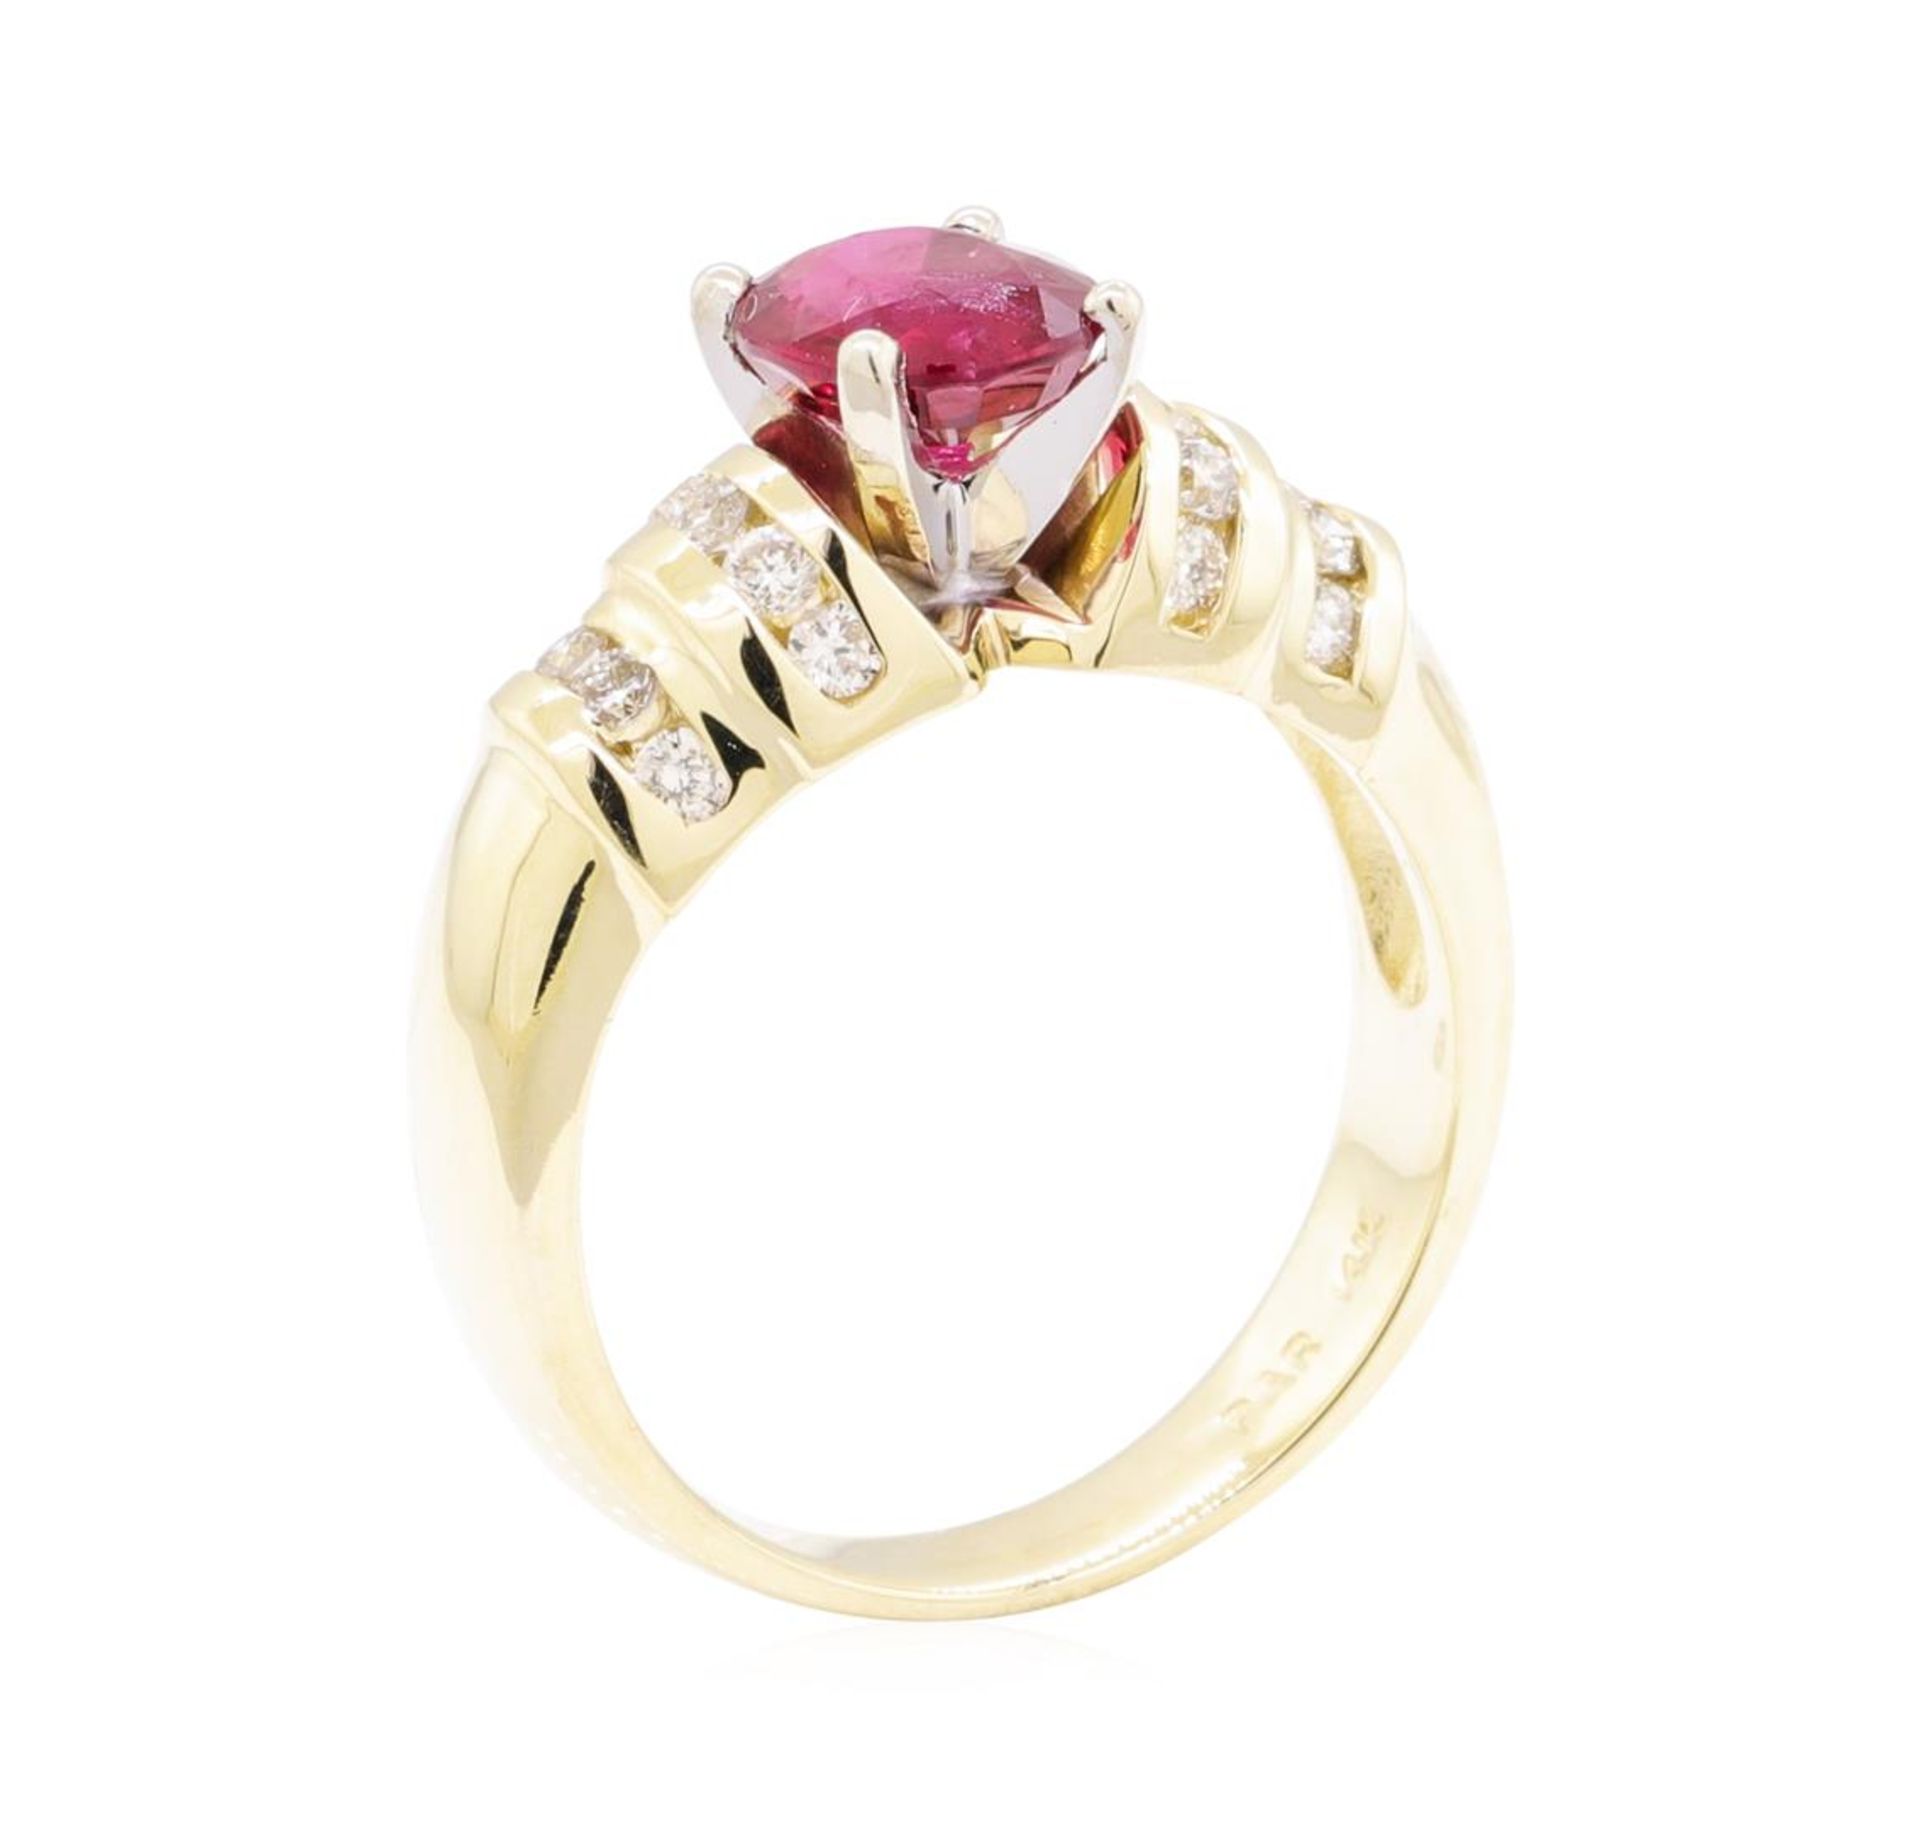 1.67 ctw Ruby And Diamond Ring - 14KT Yellow Gold - Image 7 of 10